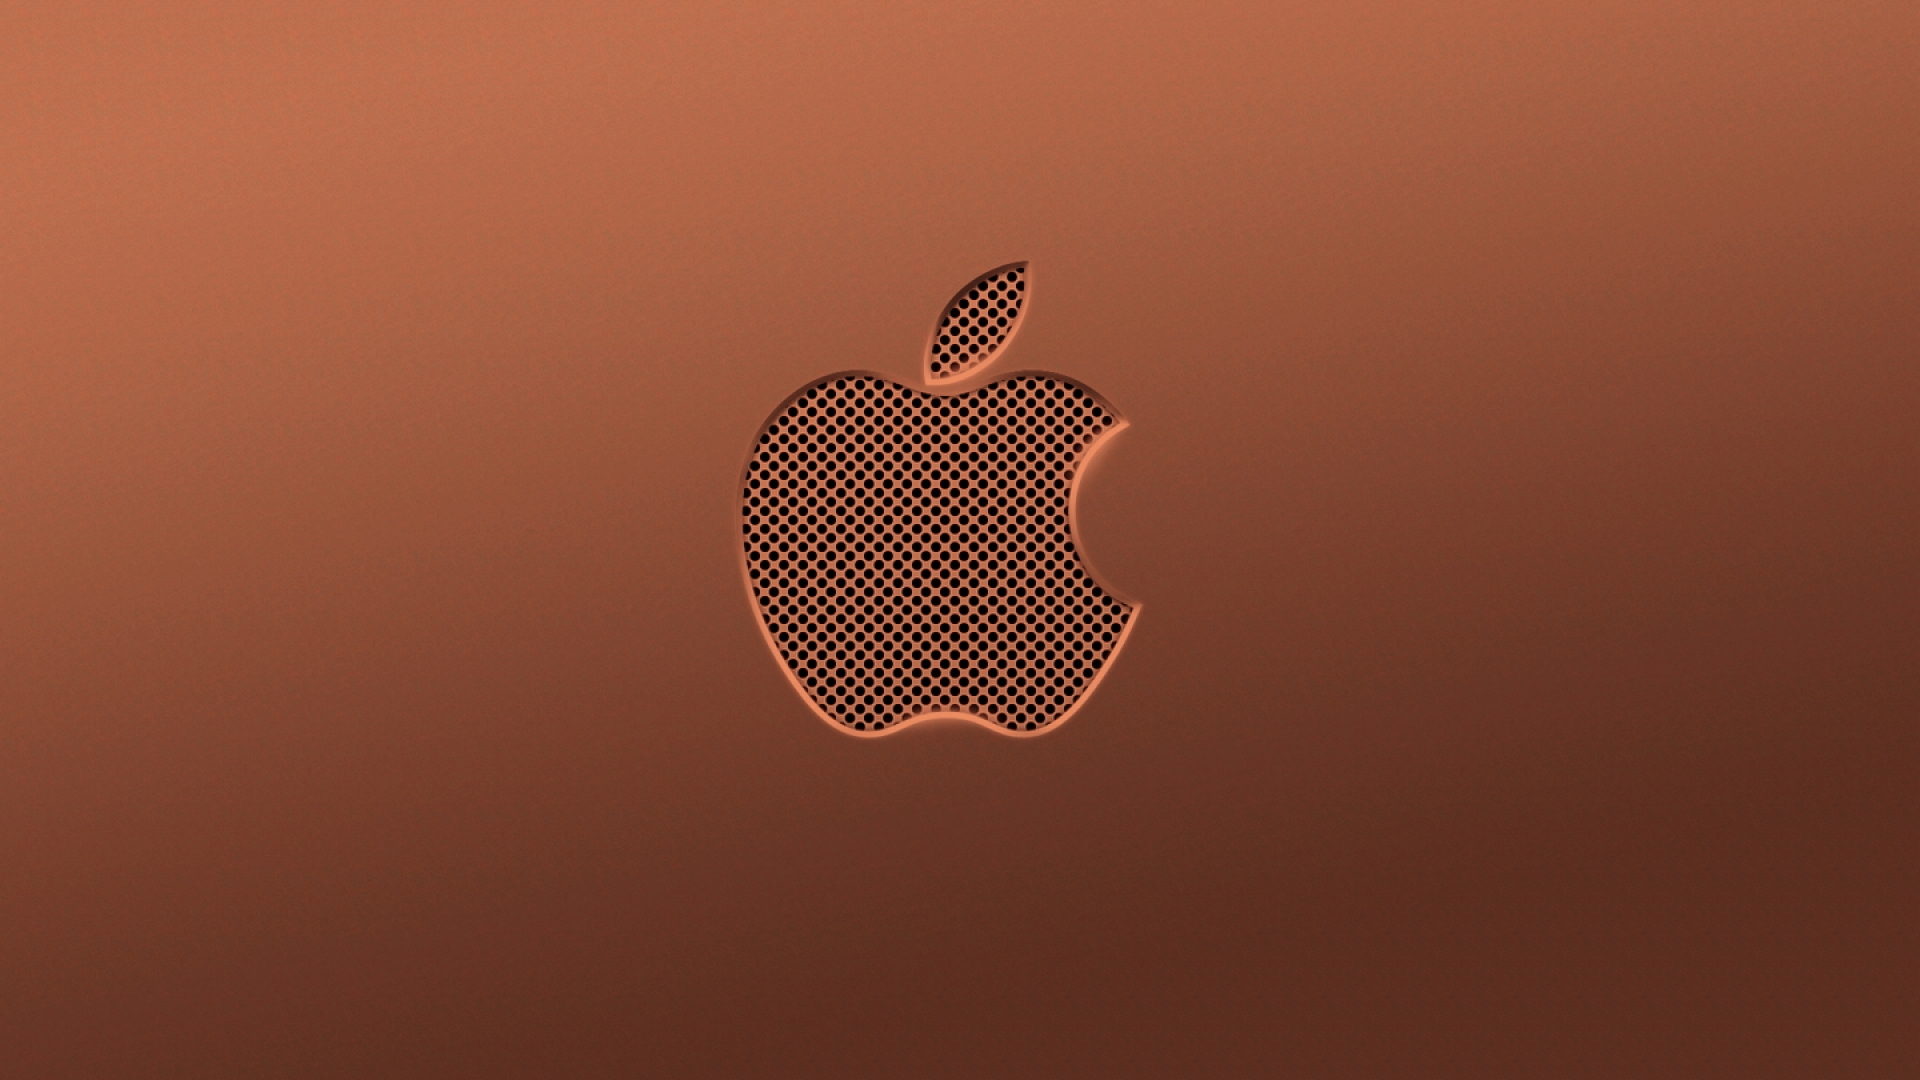 Apple Backgrounds download free Wallpapers, Backgrounds, Images